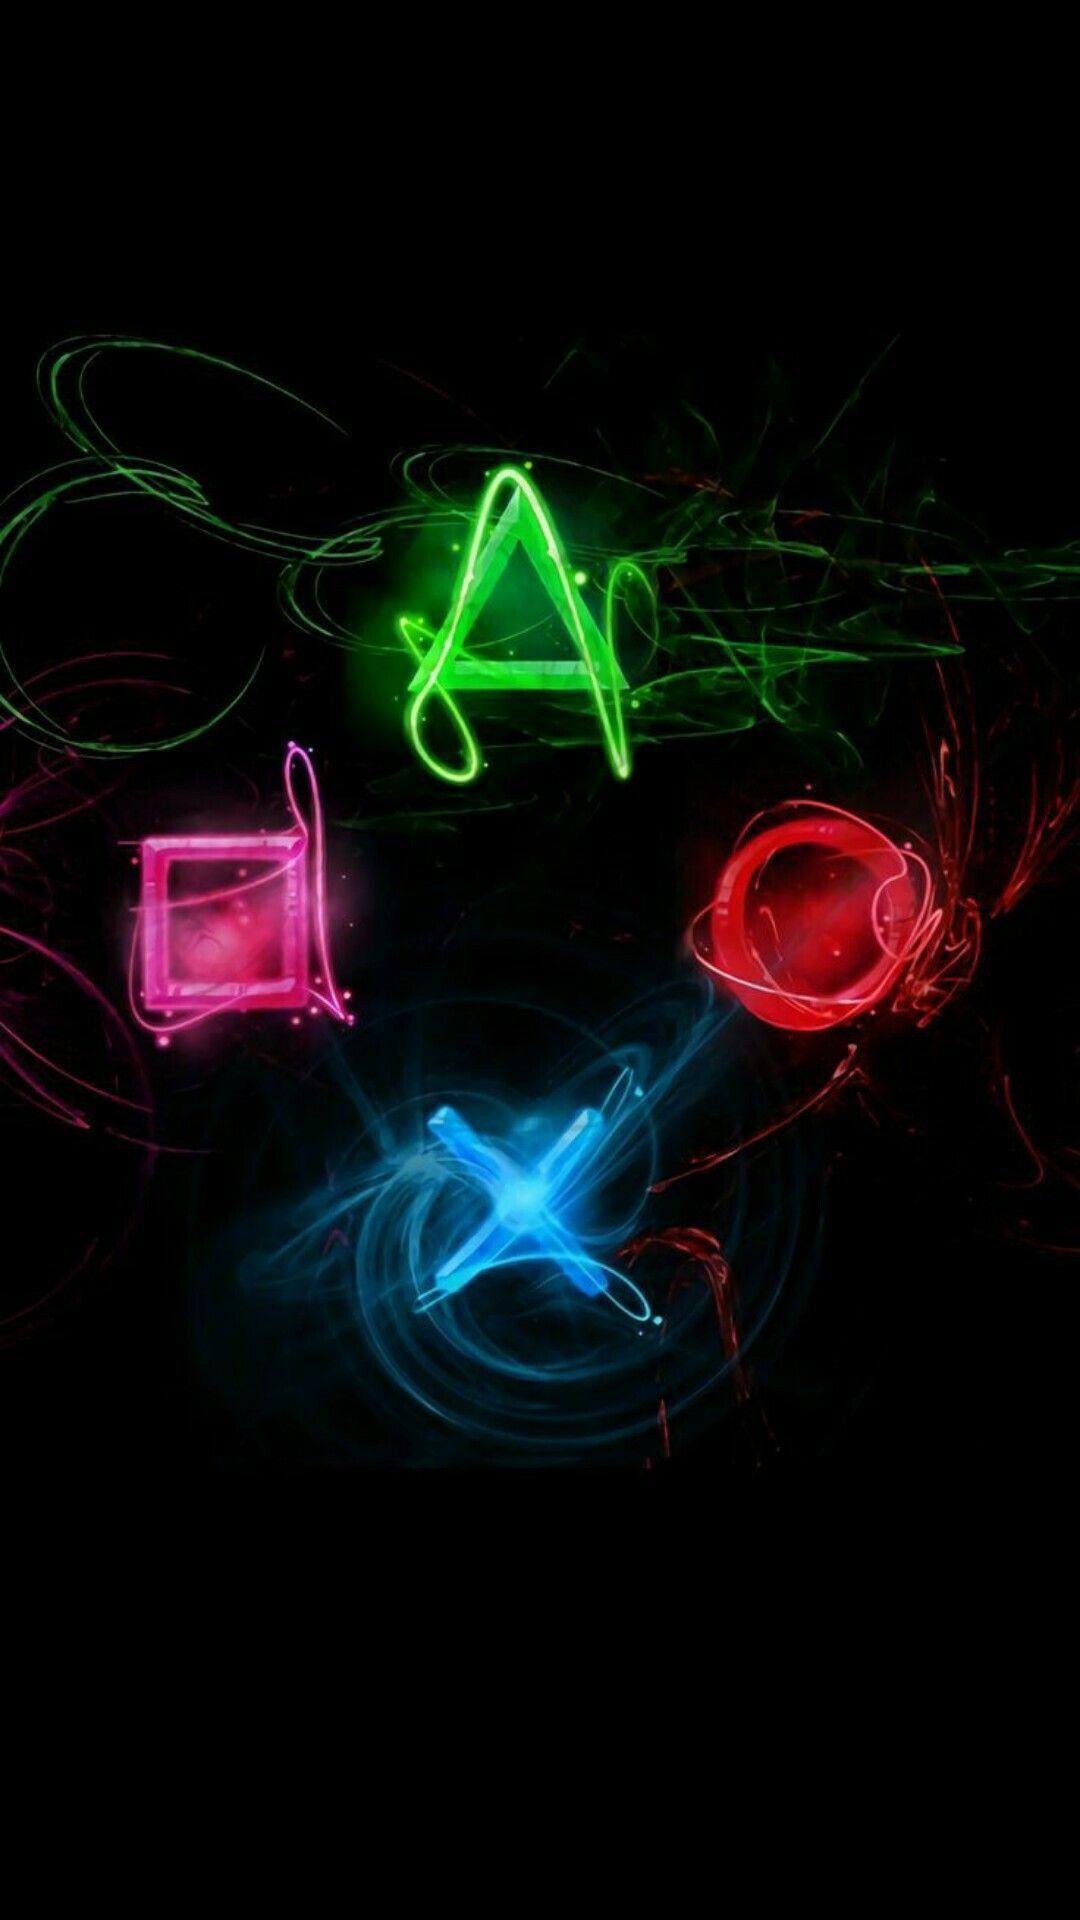 PlayStation iPhone Wallpaper Free PlayStation iPhone Background